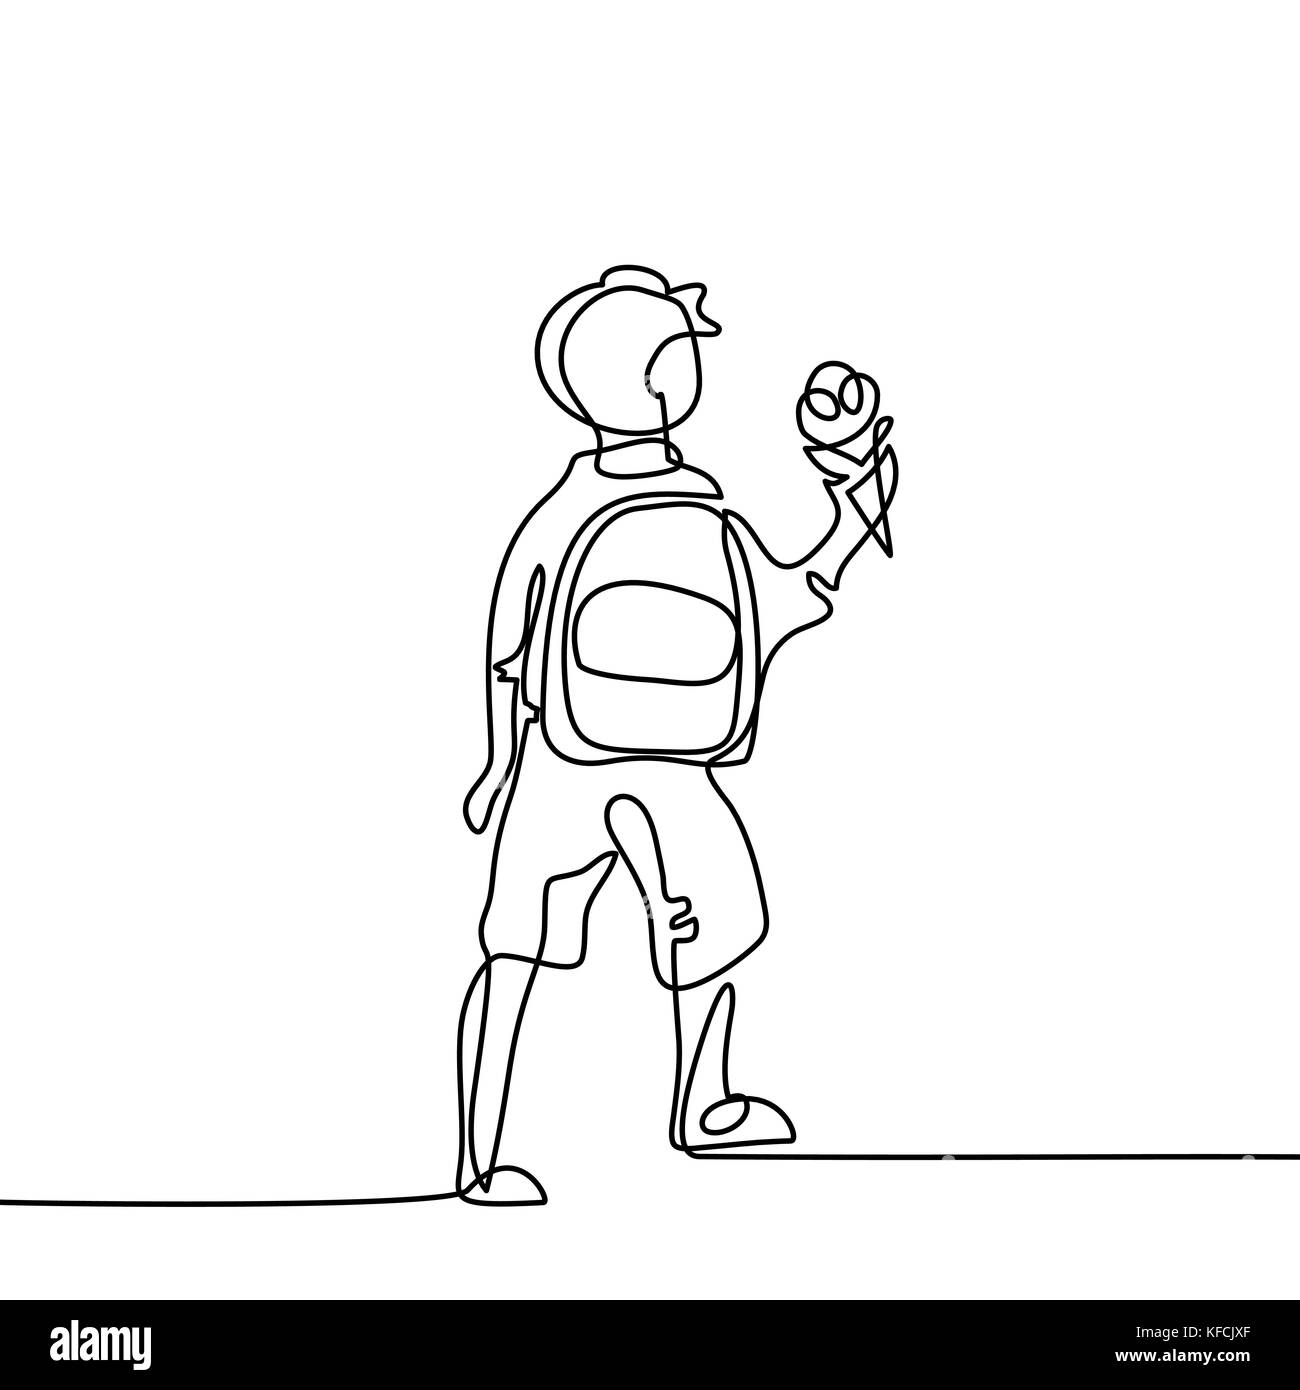 Boy with ice-cream going back to school with bag. Continuous line drawing. Vector illustration on white background Stock Vector